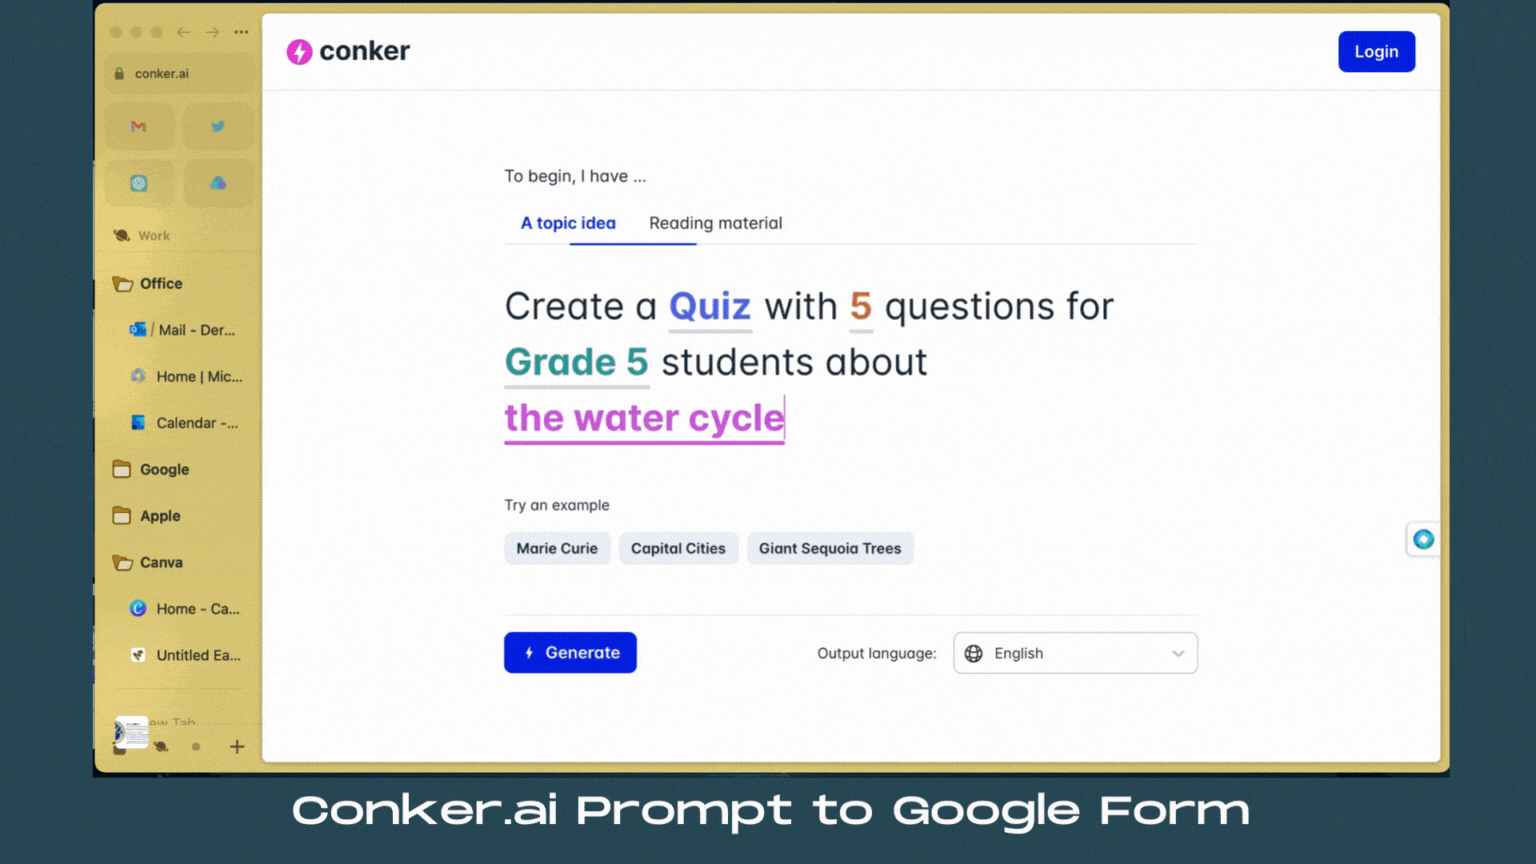 Conker.ai generating assessment questions from a prompt: Create a quiz with 5 questions for grade 5 students about the water cycle.